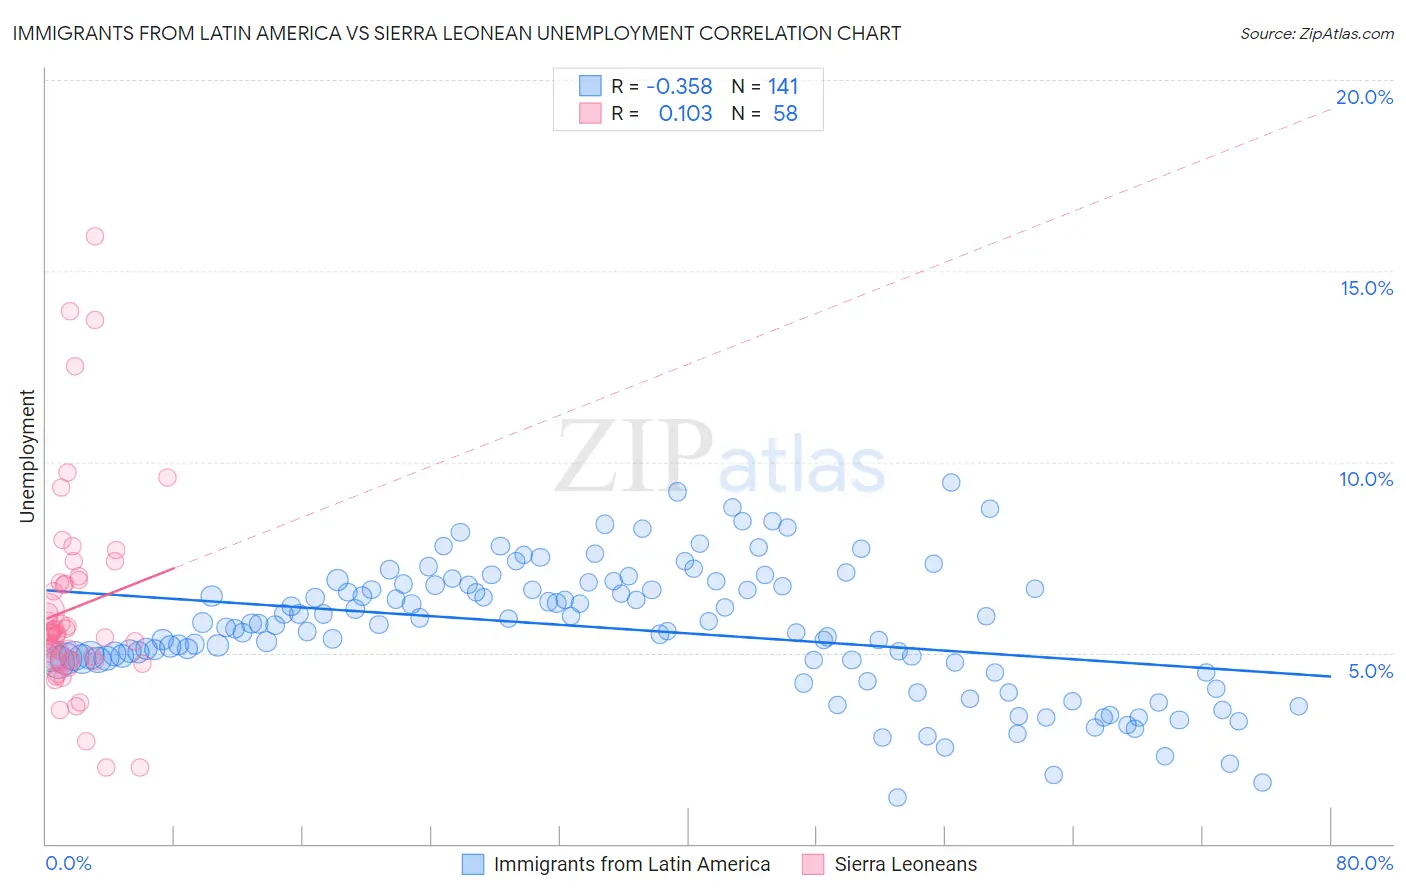 Immigrants from Latin America vs Sierra Leonean Unemployment